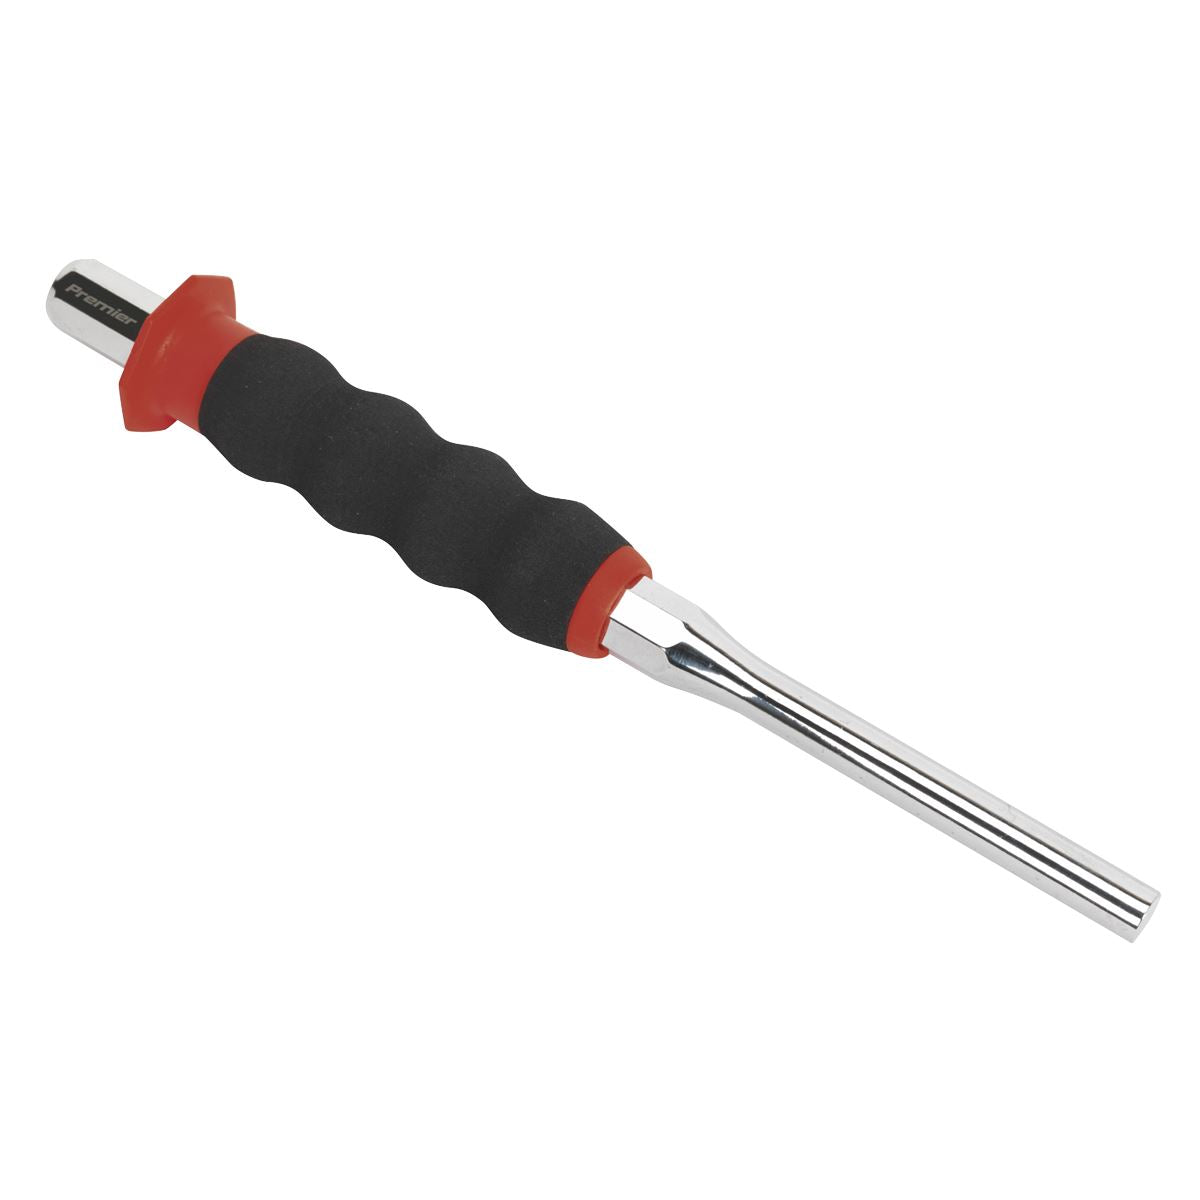 Sealey Premier Sheathed Parallel Pin Punch Ø10mm